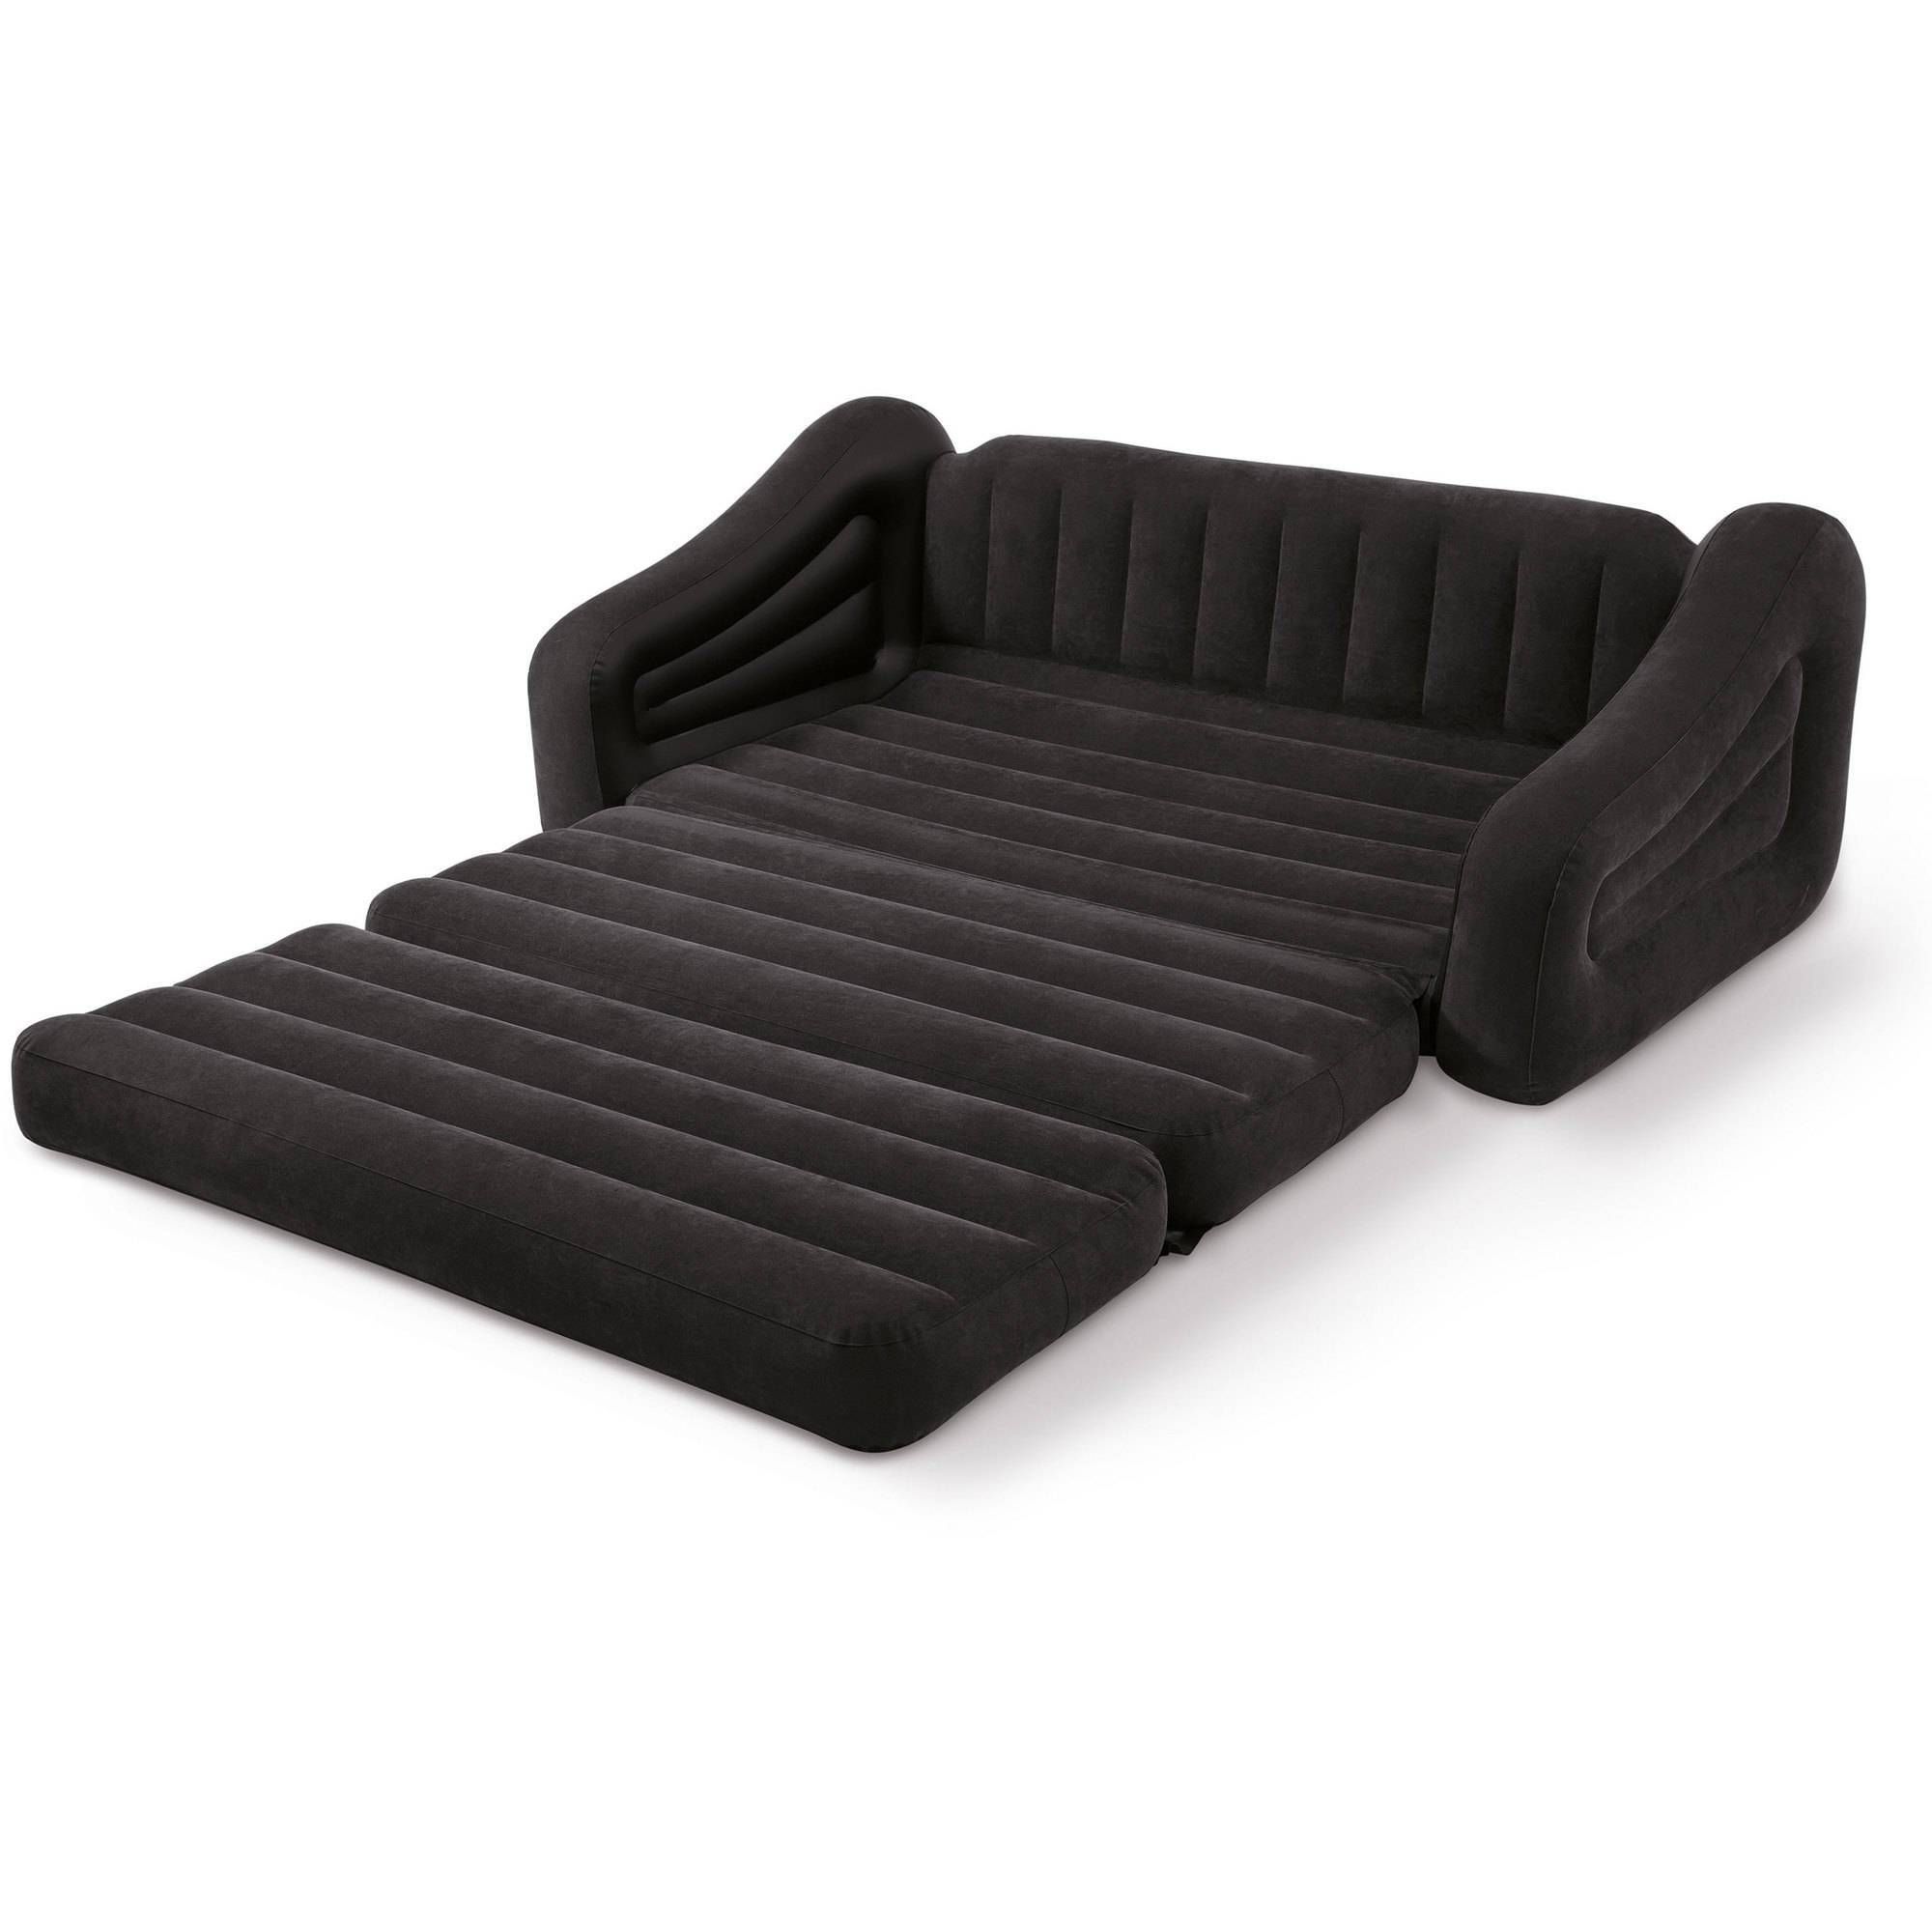 Intex Queen Inflatable Pull Out Sofa Bed – Walmart With Regard To Intex Queen Sleeper Sofas (View 8 of 15)